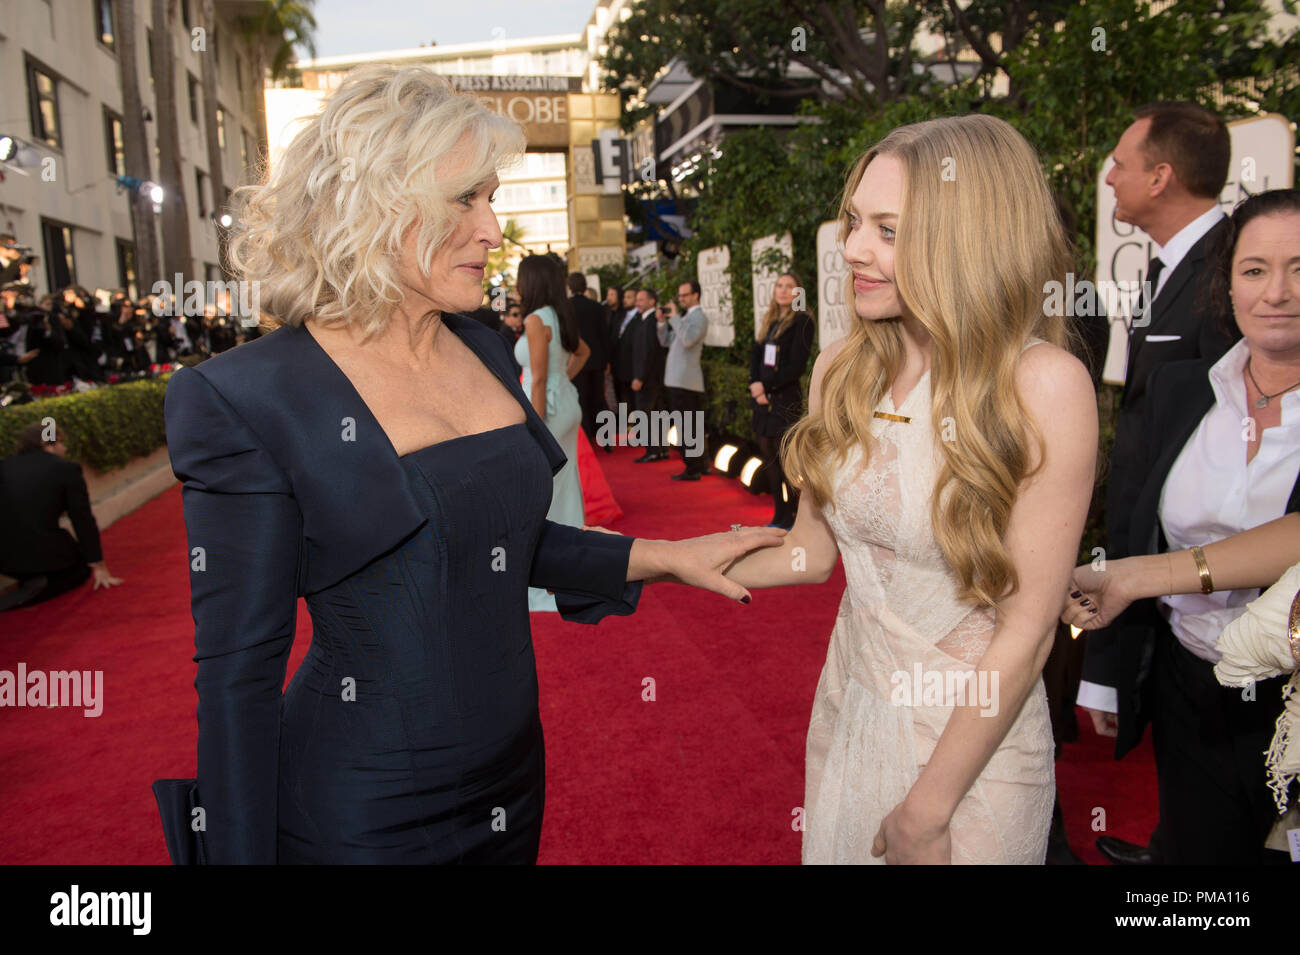 Nominated for BEST PERFORMANCE BY AN ACTRESS IN A TELEVISION SERIES – DRAMA for her role in “DAMAGES”, actress Glenn Close (L) greets actress Amanda Seyfried at the 70th Annual Golden Globe Awards at the Beverly Hilton in Beverly Hills, CA on Sunday, January 13, 2013. Stock Photo